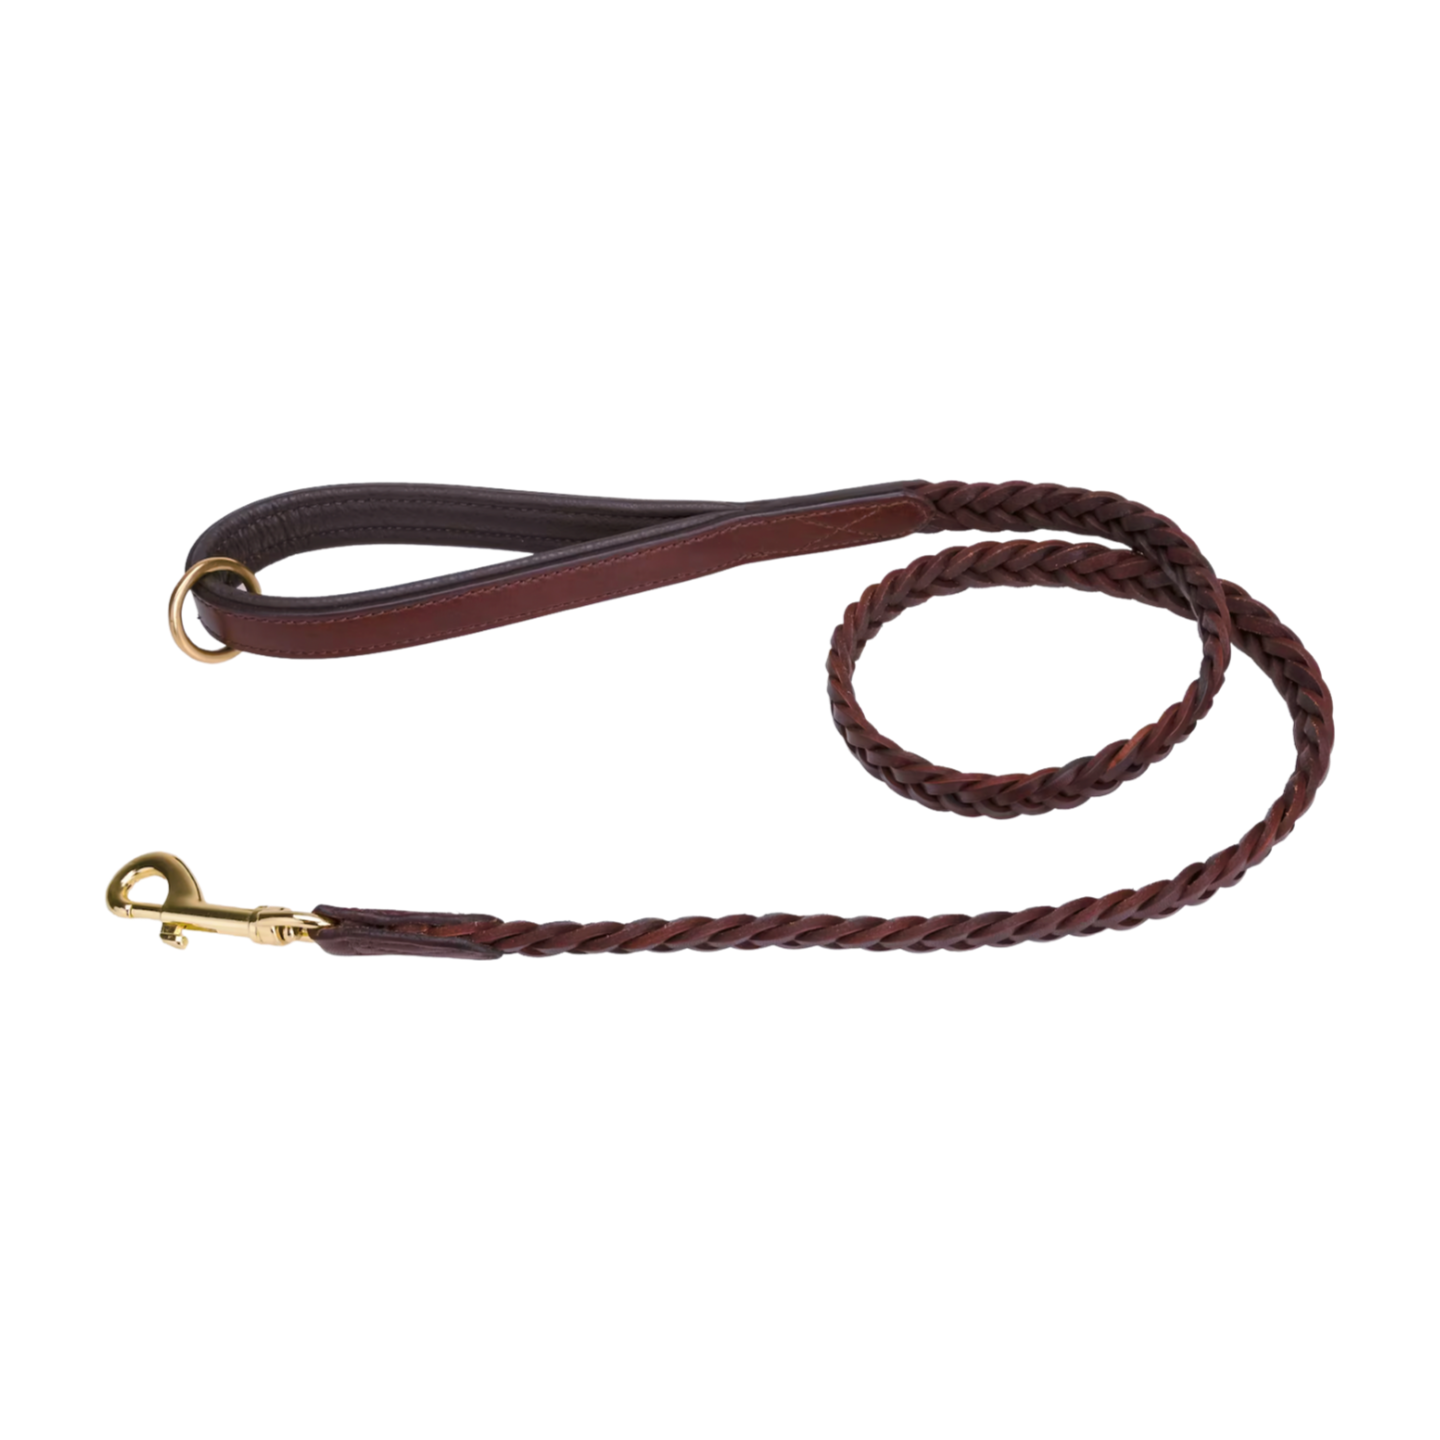 Brown Braided Leather Dog Leash manufacturer